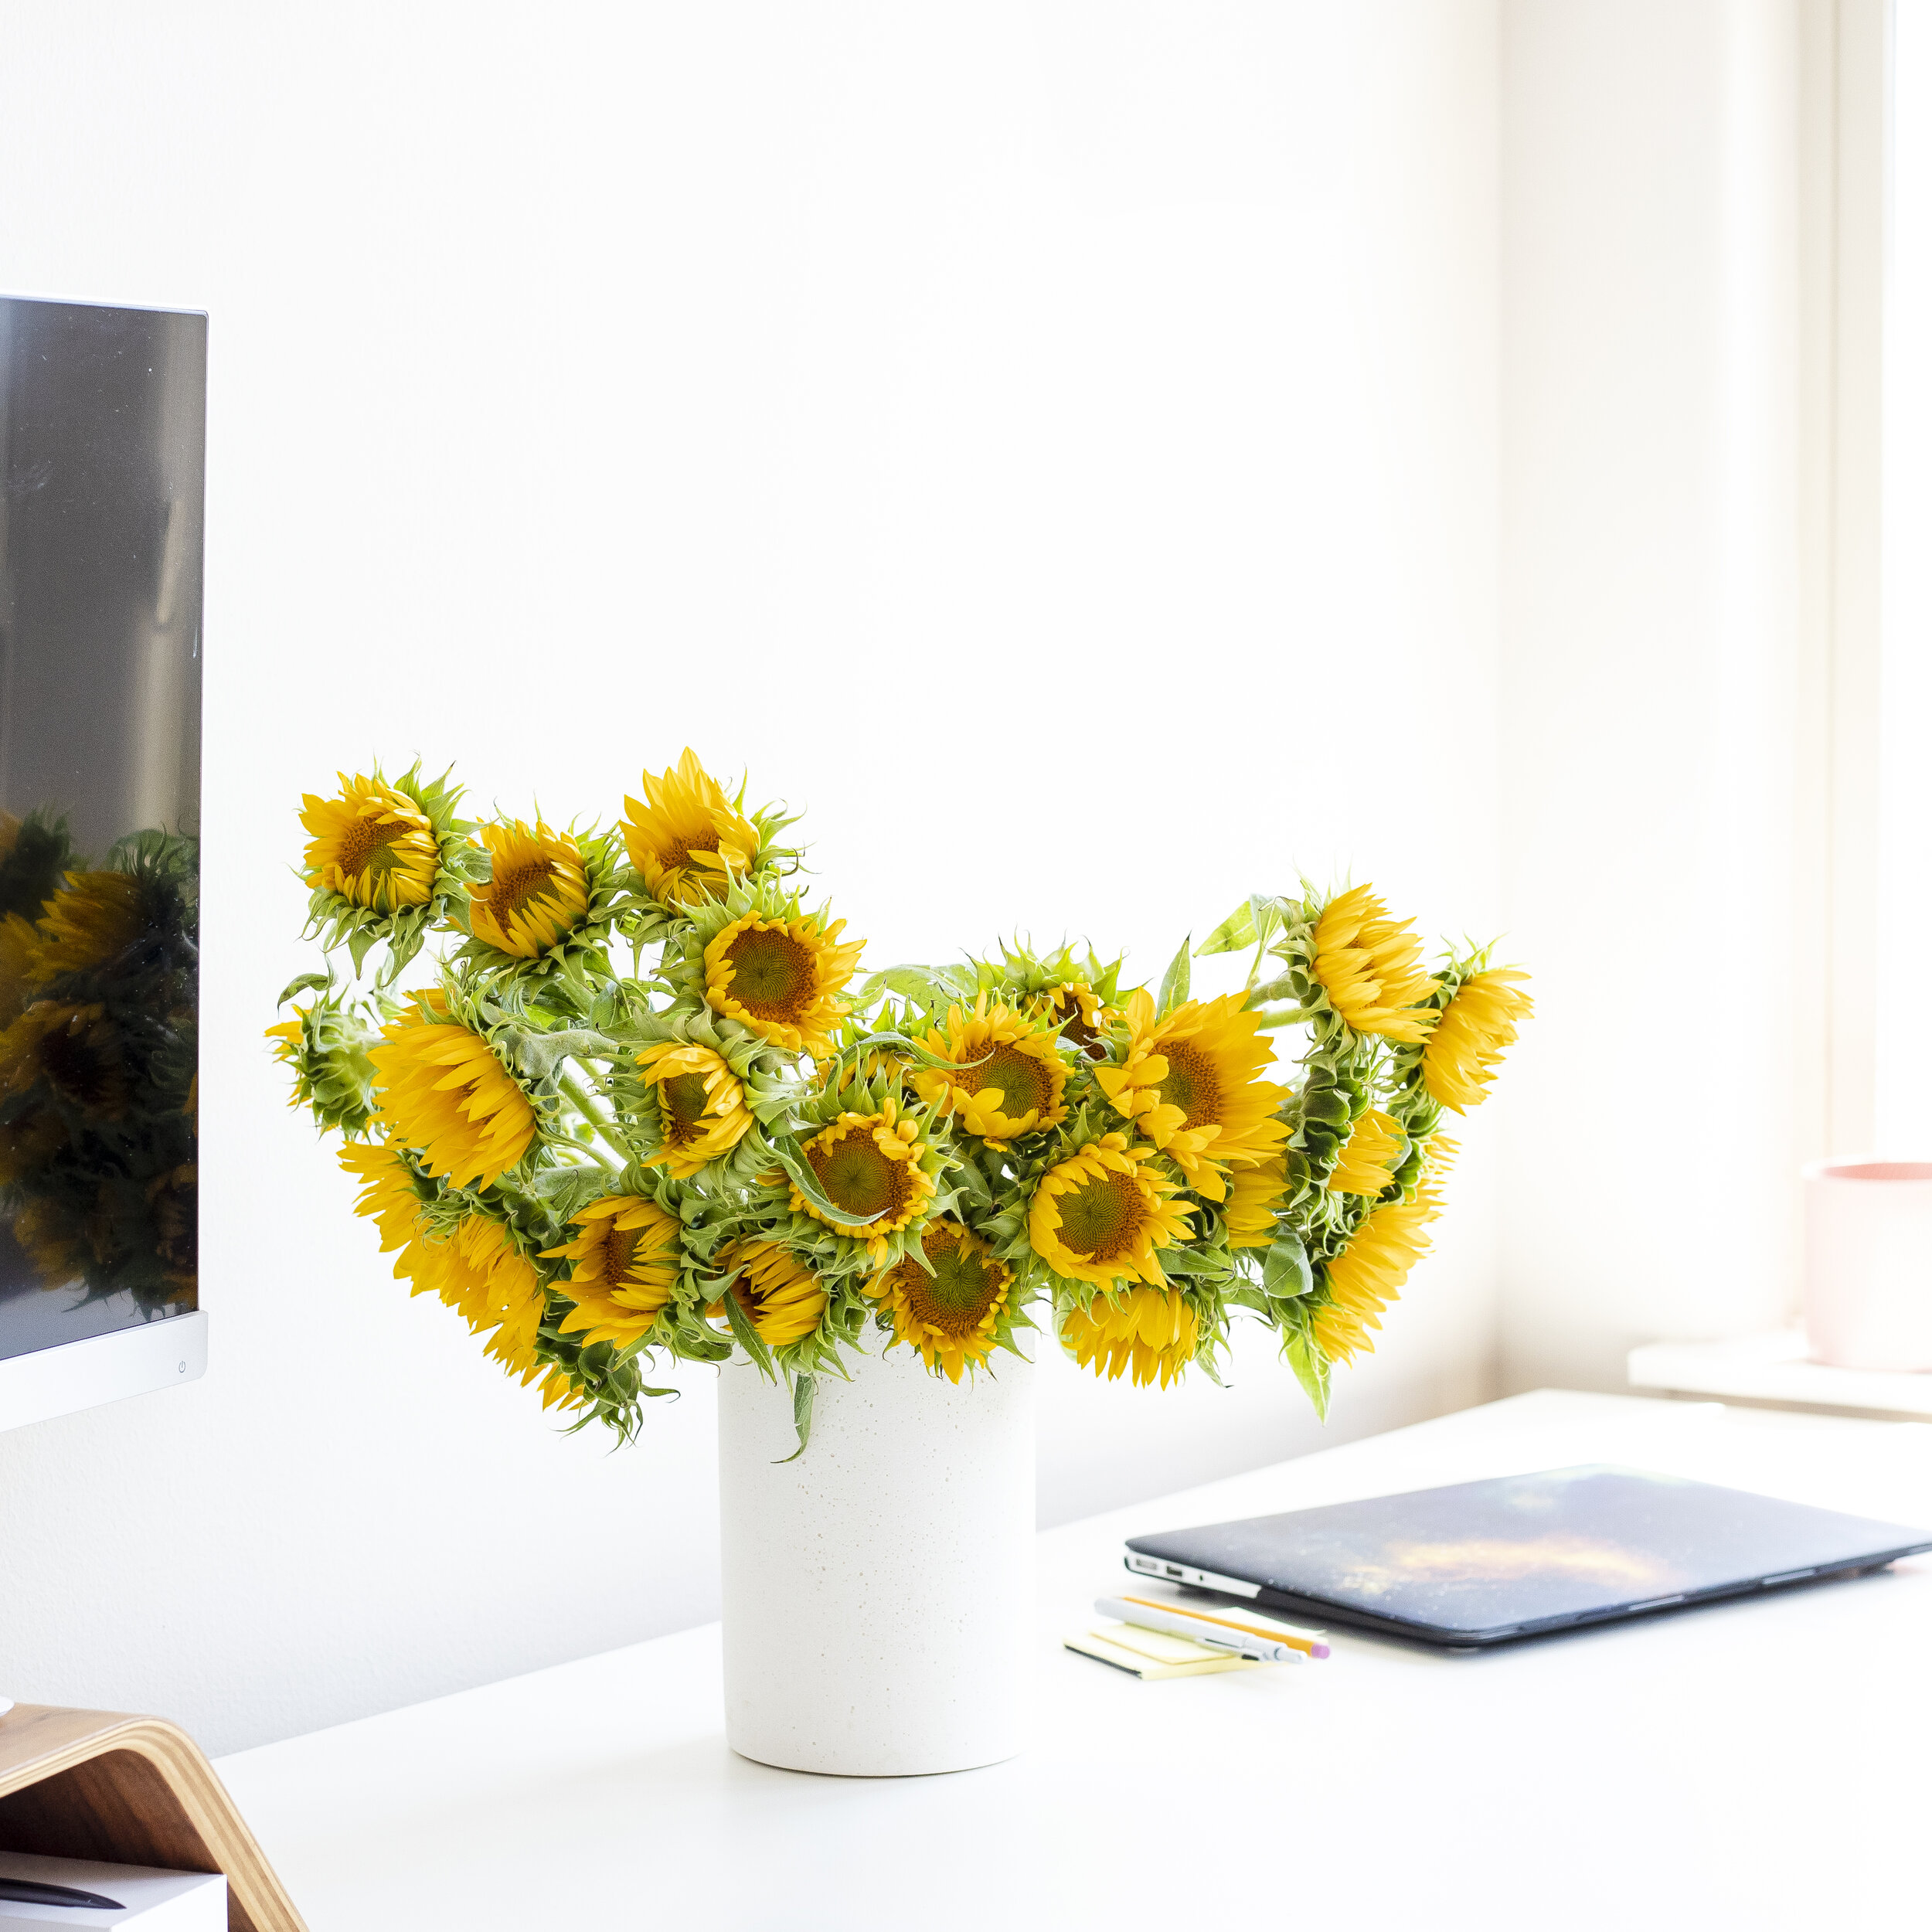 An arrangement of sunflowers in a white vase, sitting on a white desktop with a laptop and pens beside it.